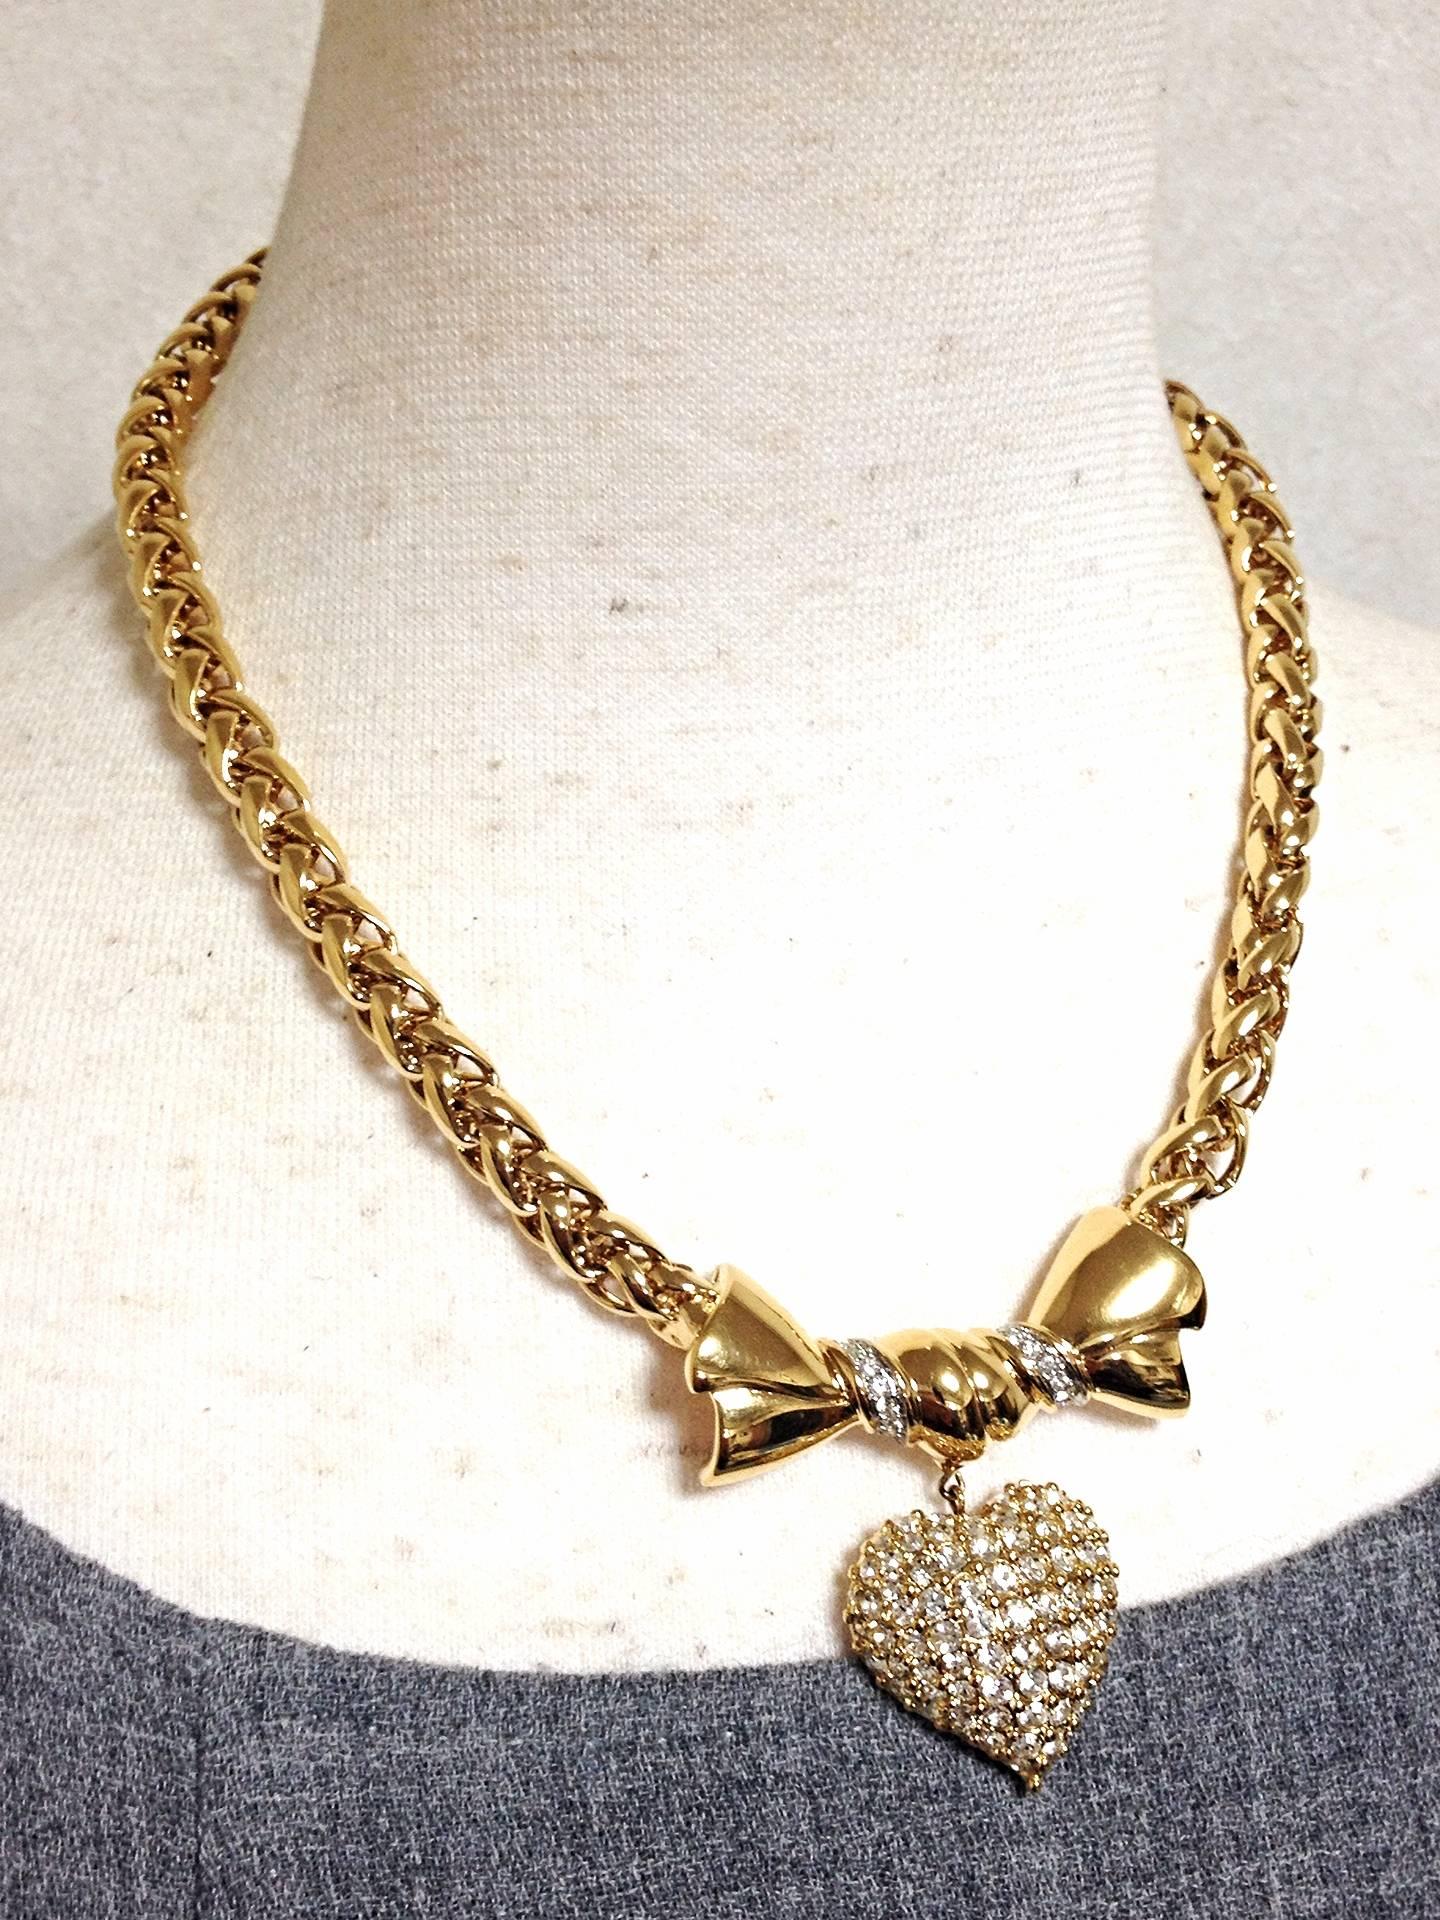 MINT. Vintage Nina RIcci golden chain statement necklace with ribbon bow and crystal stone heart pendant top. Perfect vintage jewelry.

Fun and Chic and Gorgeous piece from Nina Ricci! Great gift idea. Free gift wrapping. 
MINT/NEW